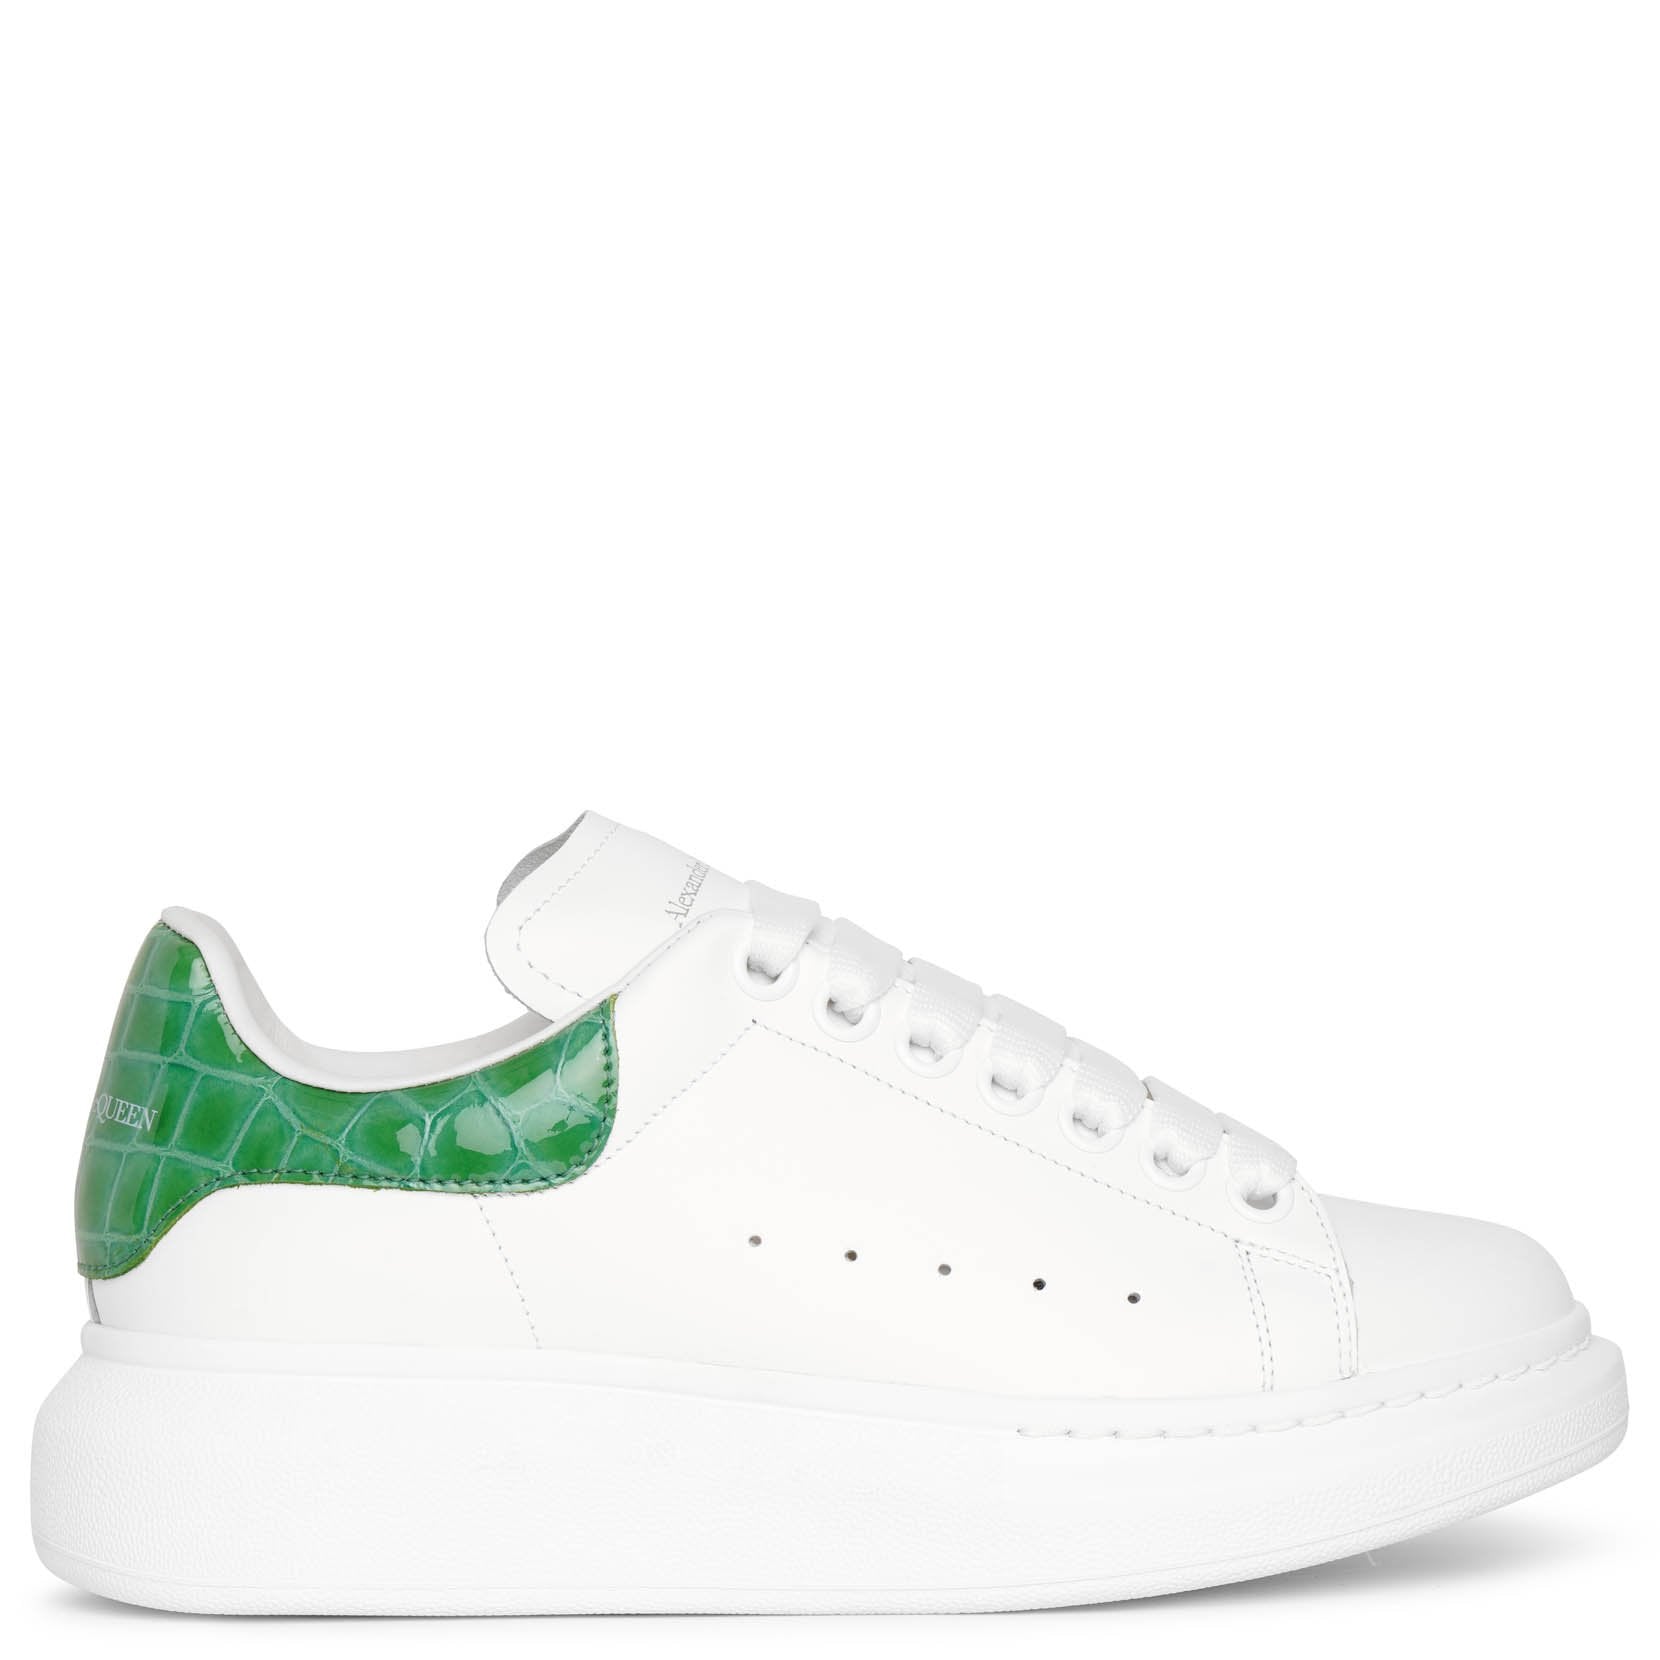 Alexander McQueen | White and green embossed classic sneakers | Savannahs